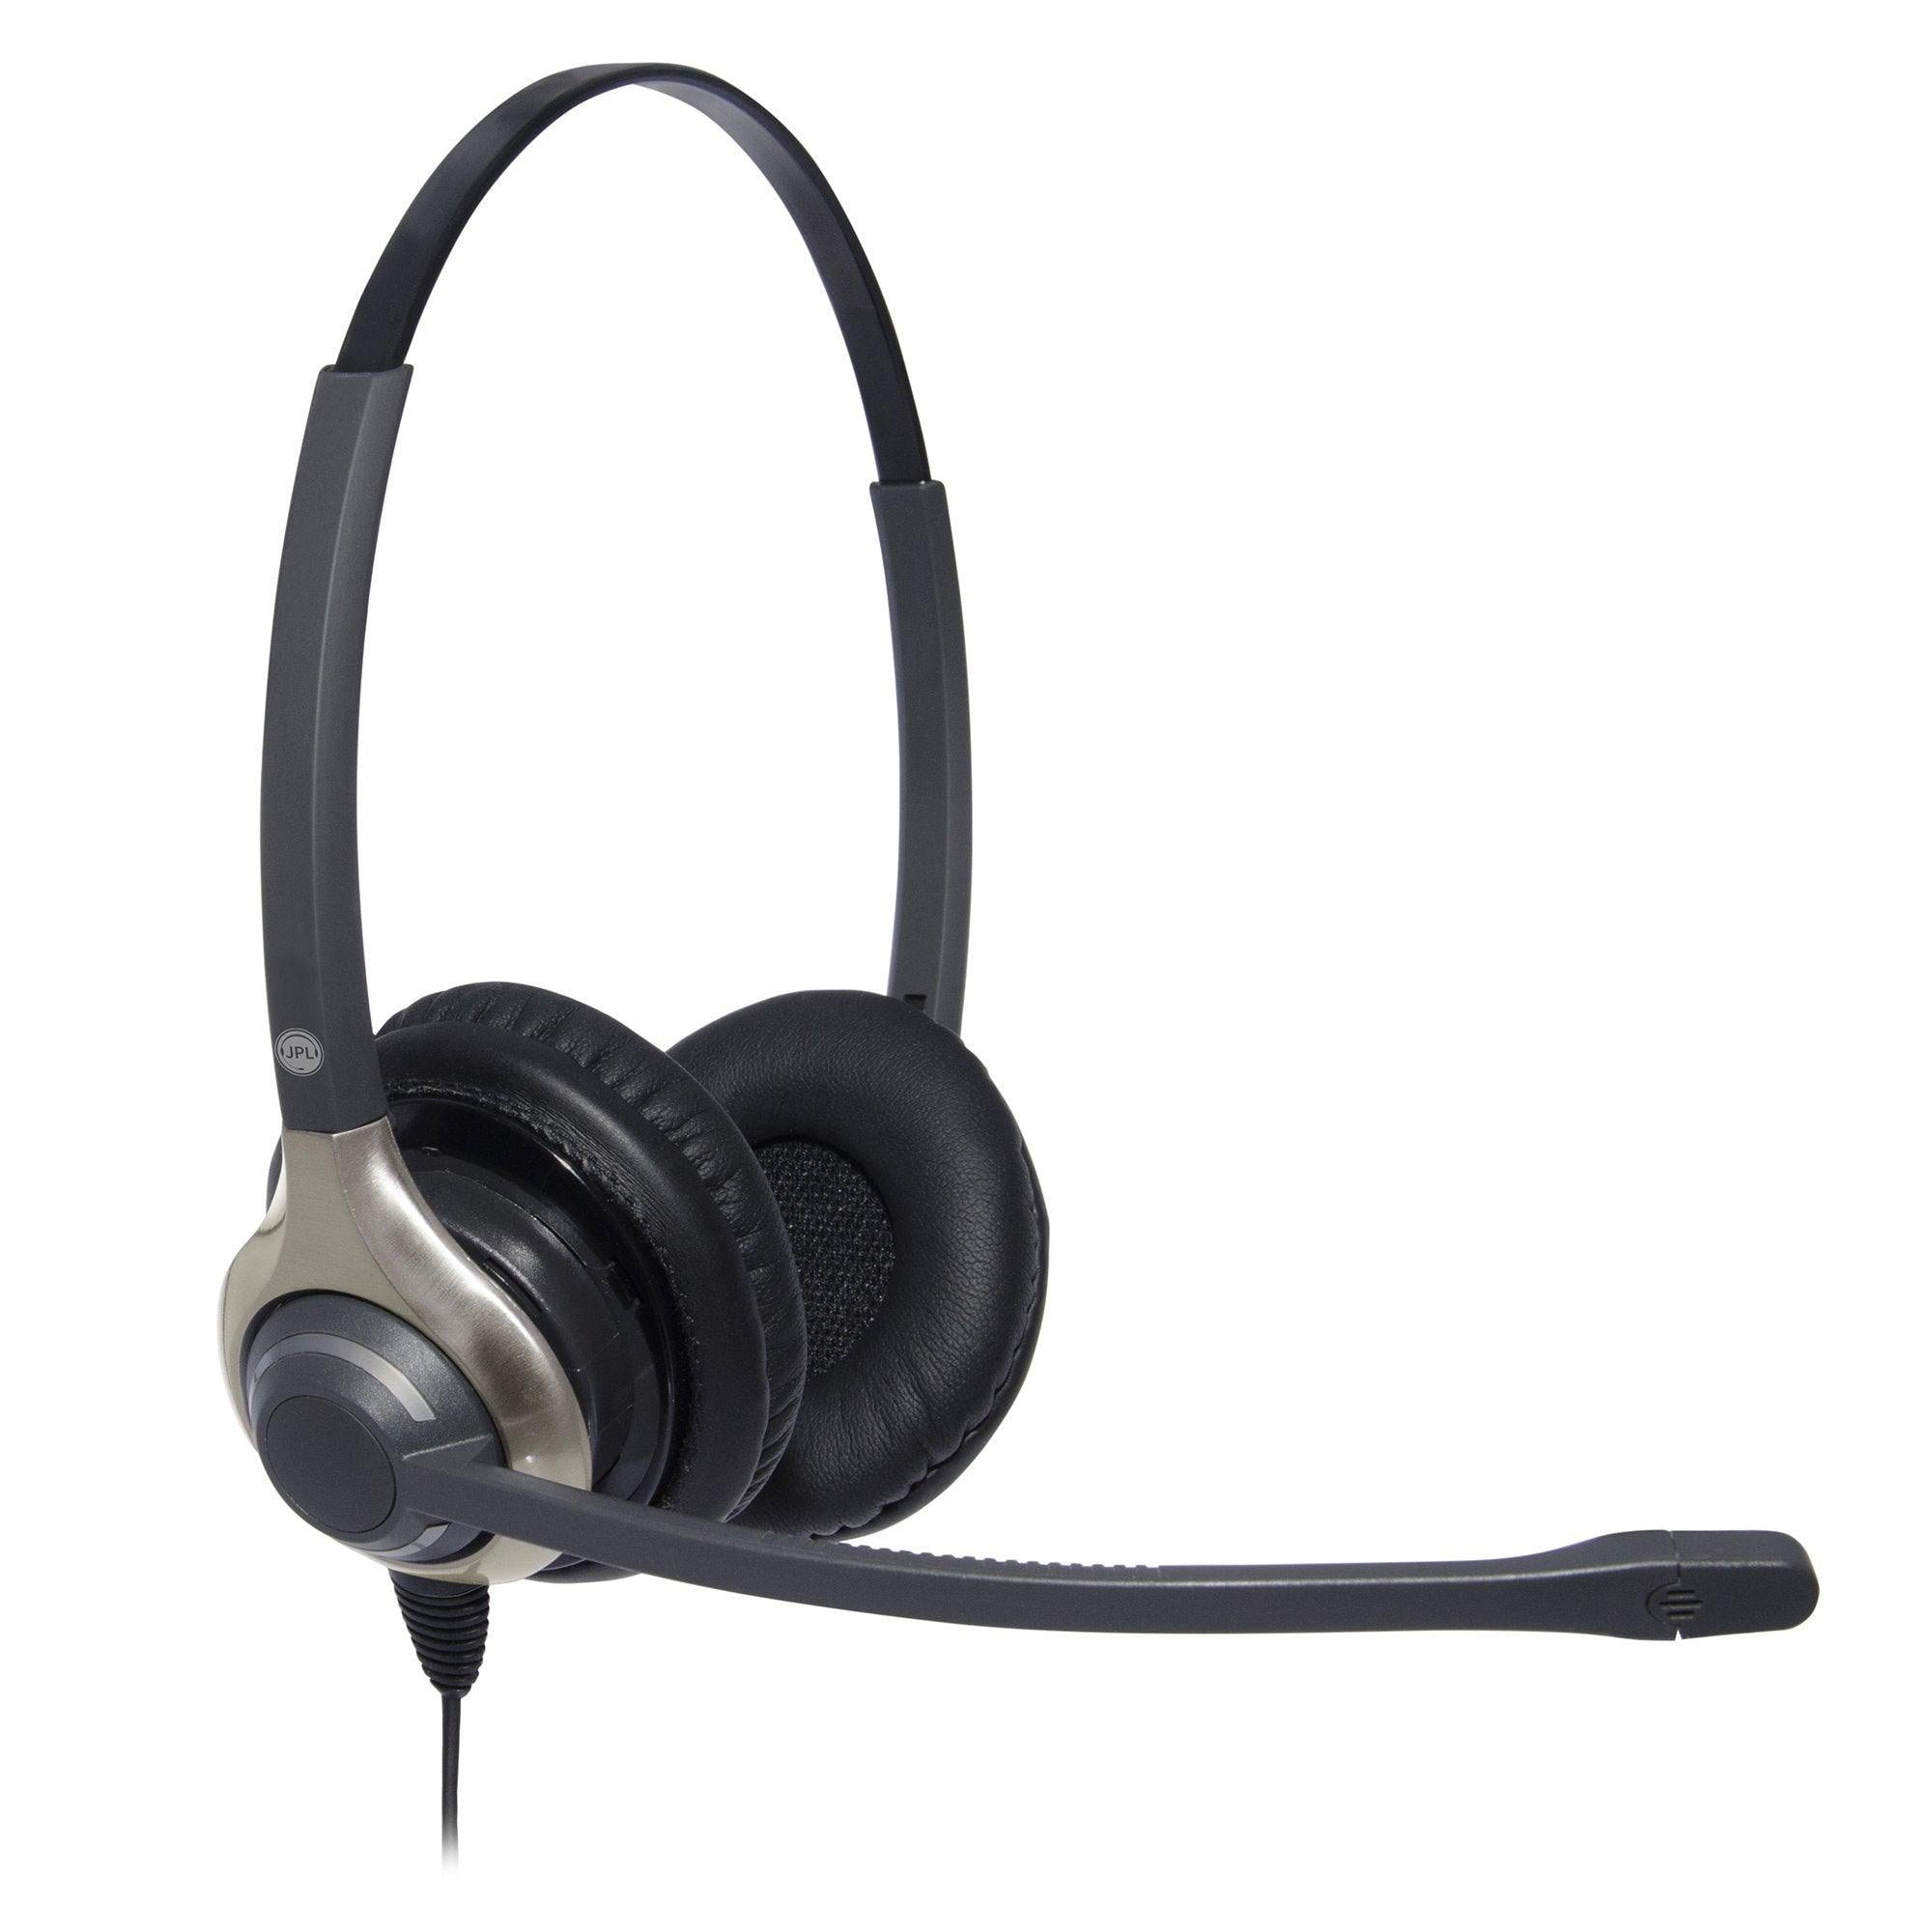 Cisco 8845 Ultra Noise Cancelling headset - Headsets4business